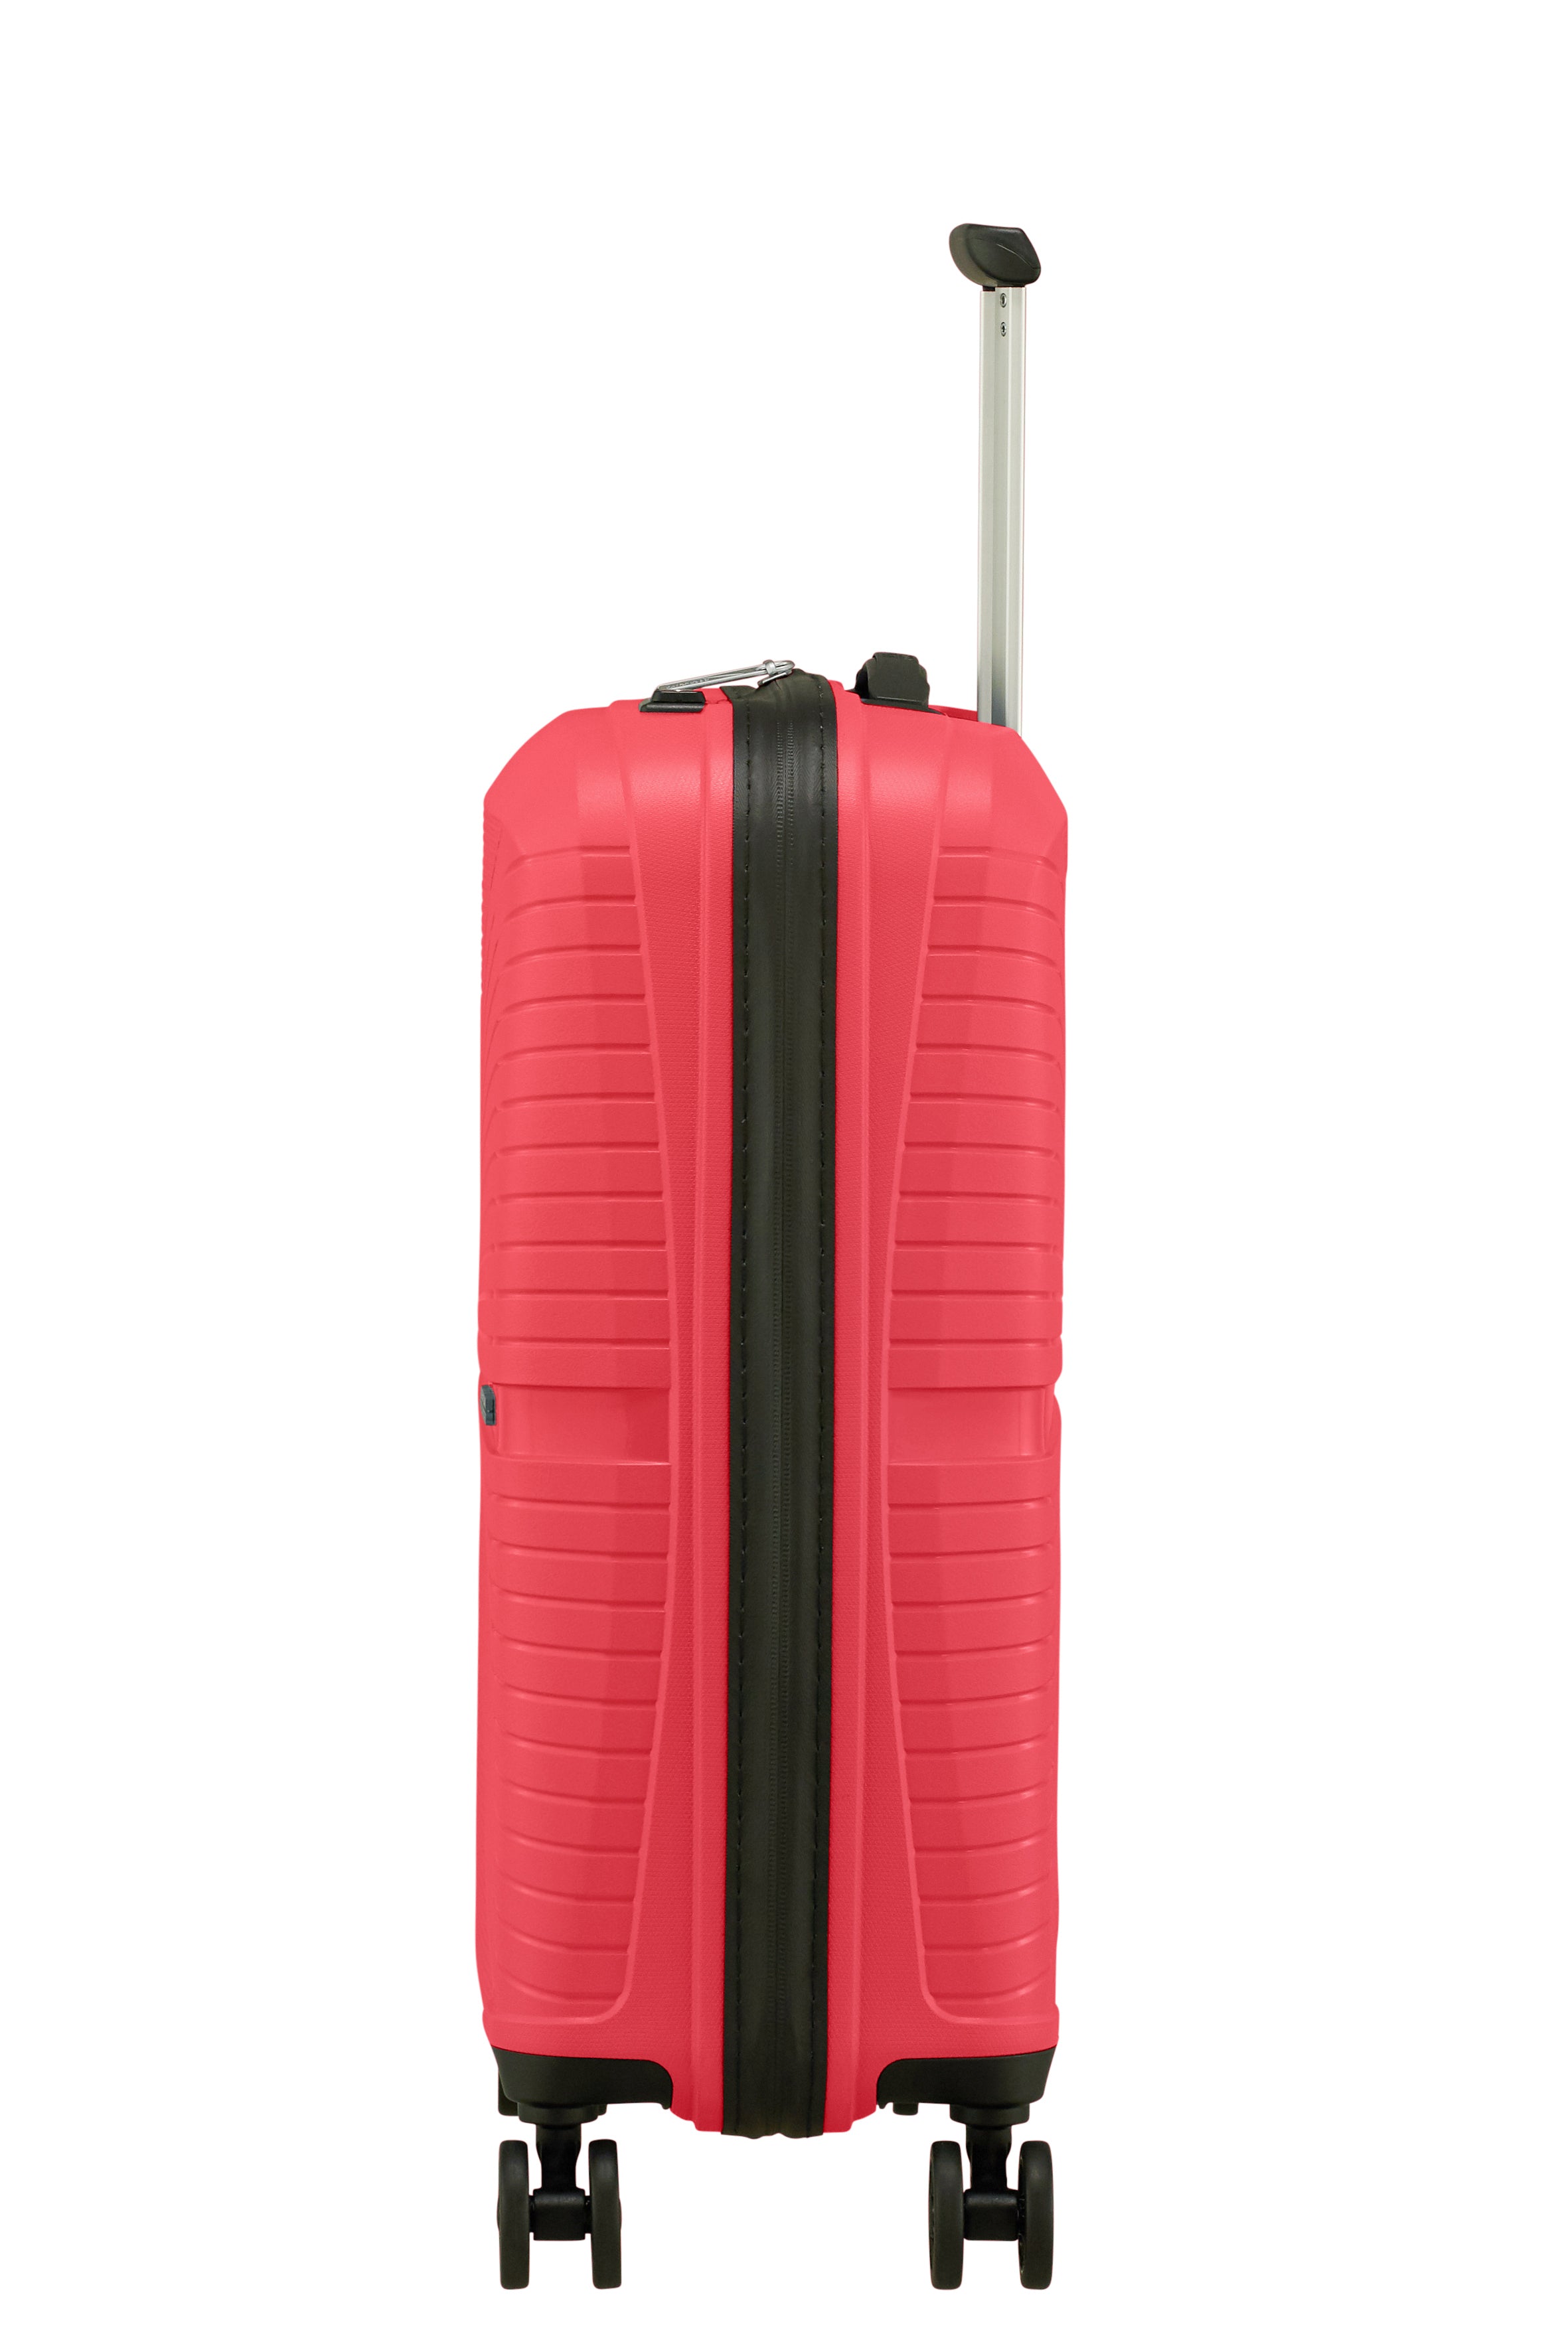 American Tourister - Airconic 55cm Small 4 Wheel Hard Suitcase - Paradise Pink - 0